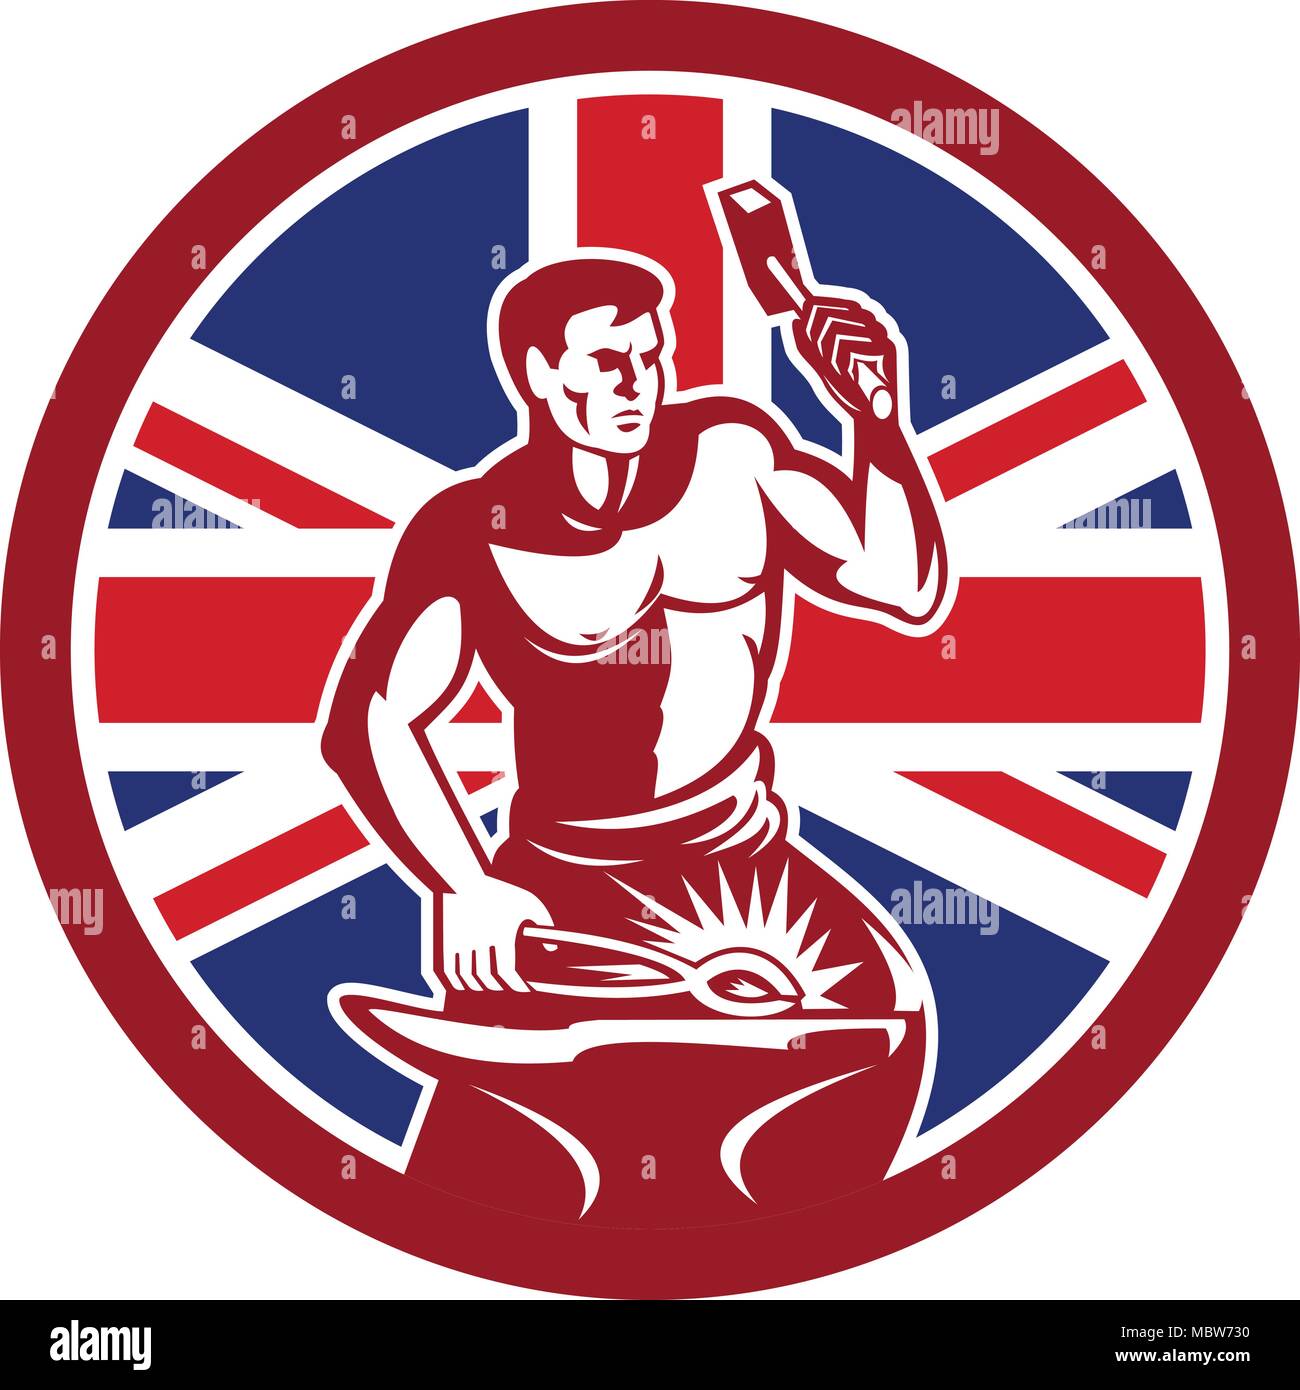 Icon retro style illustration of a British blacksmith or farrier holding hammer and anvil with United Kingdom UK, Great Britain Union Jack flag set in Stock Vector